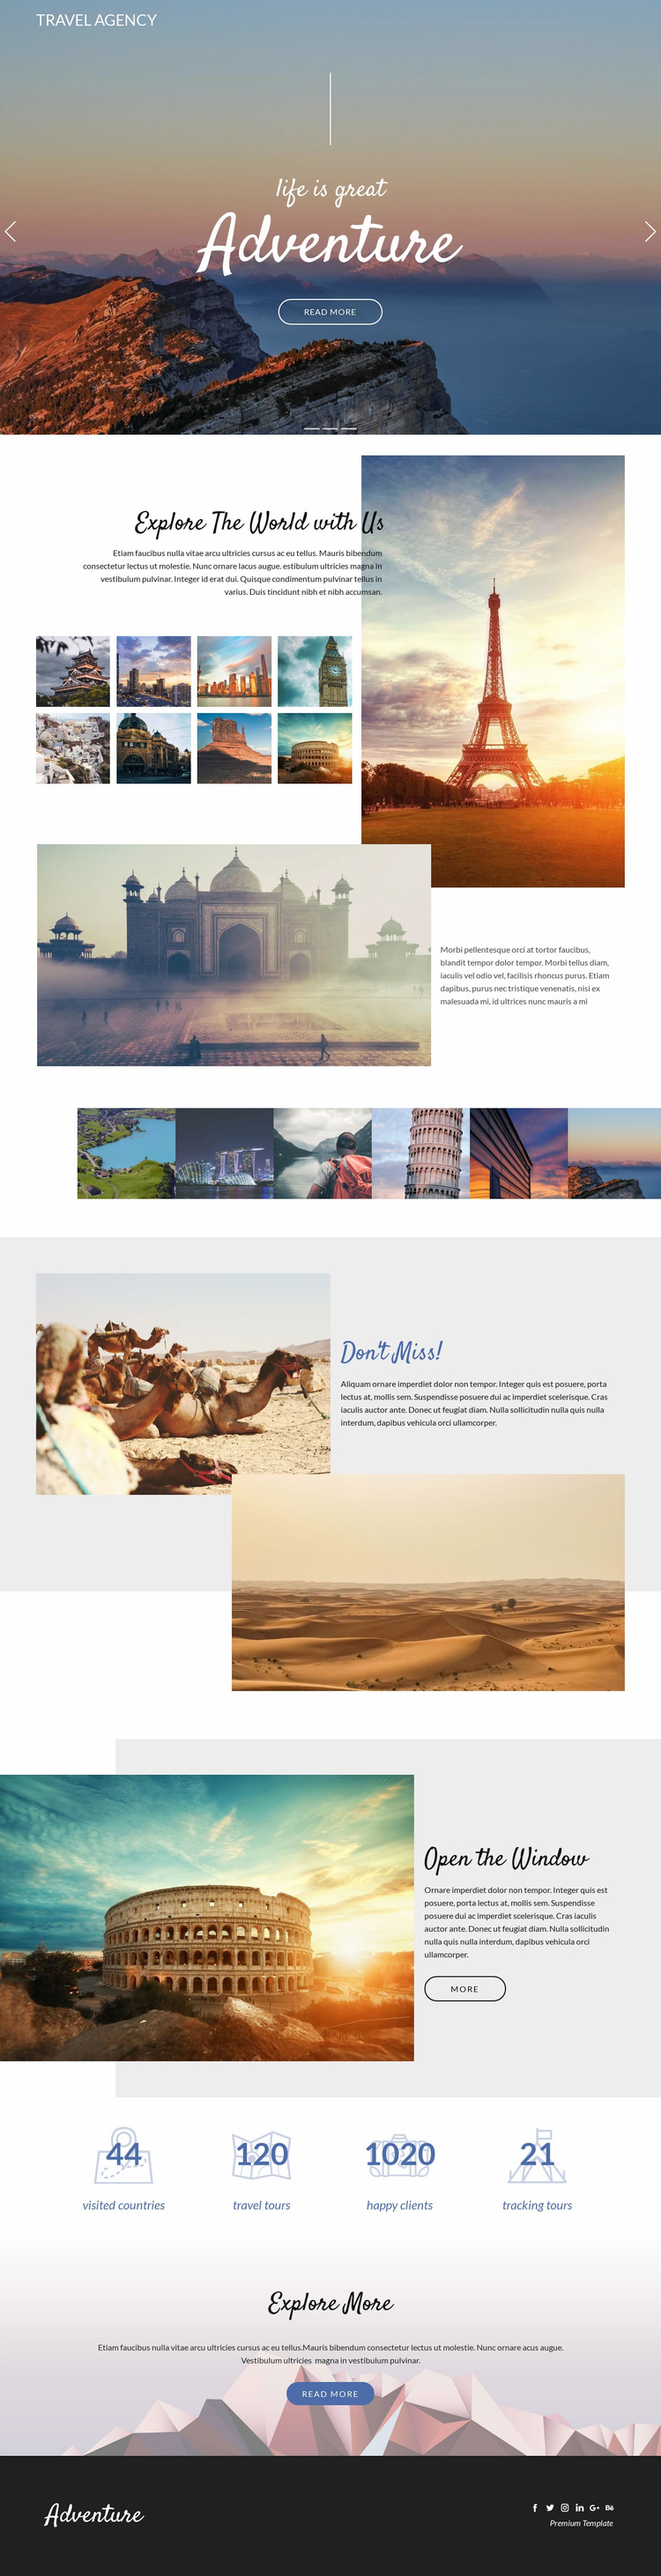 Adventure and travel Wix Template Alternative